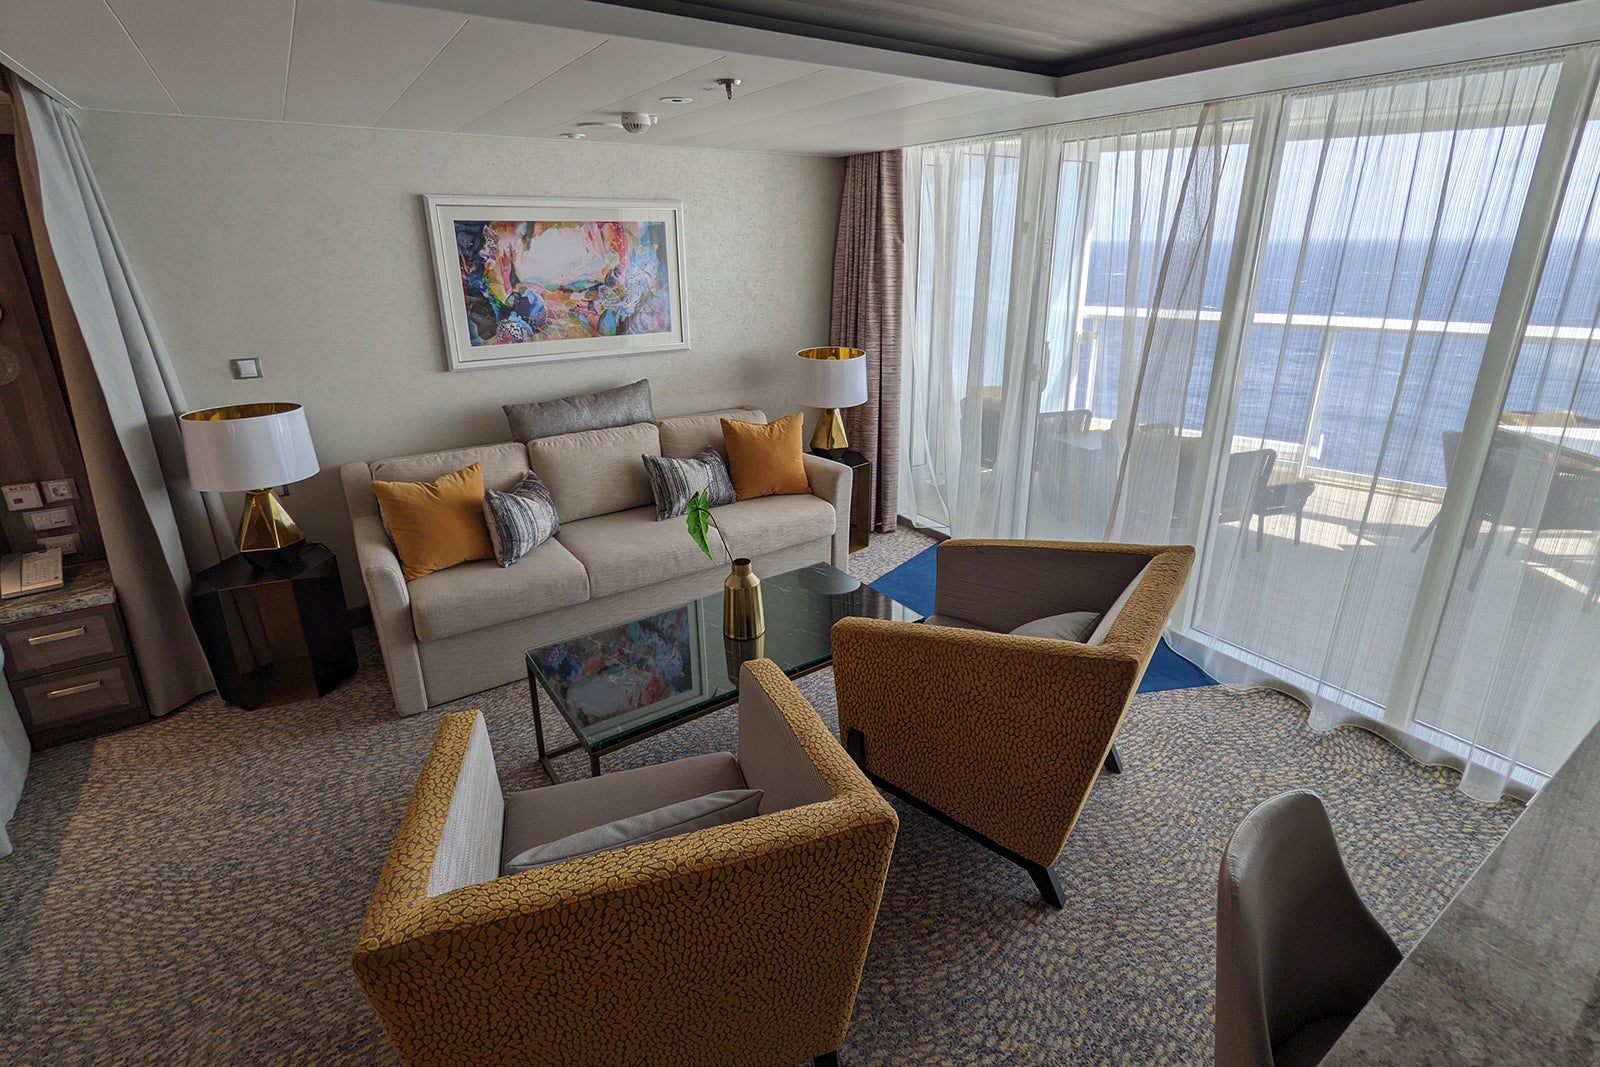 Adventure Of The Seas cabins and suites | CruiseMapper